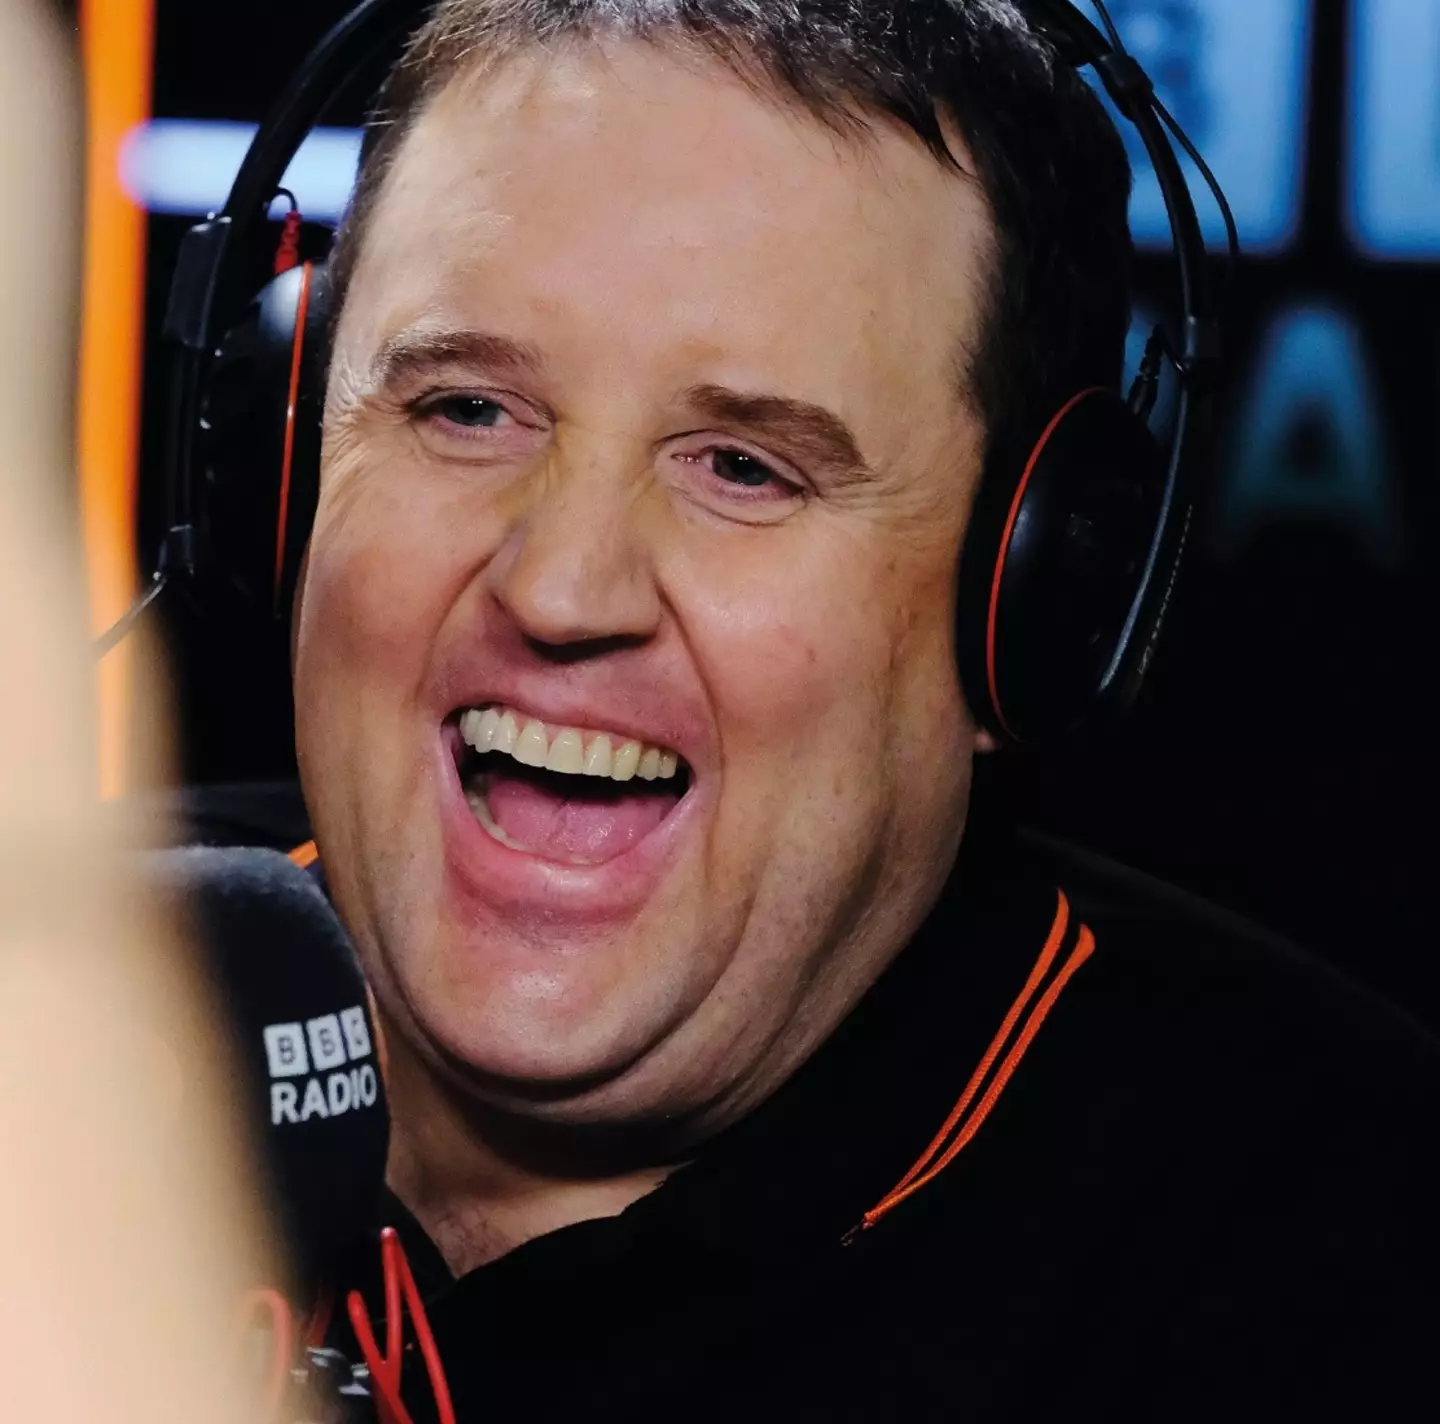 Peter Kay said he thought he'd only be in the news when he died.